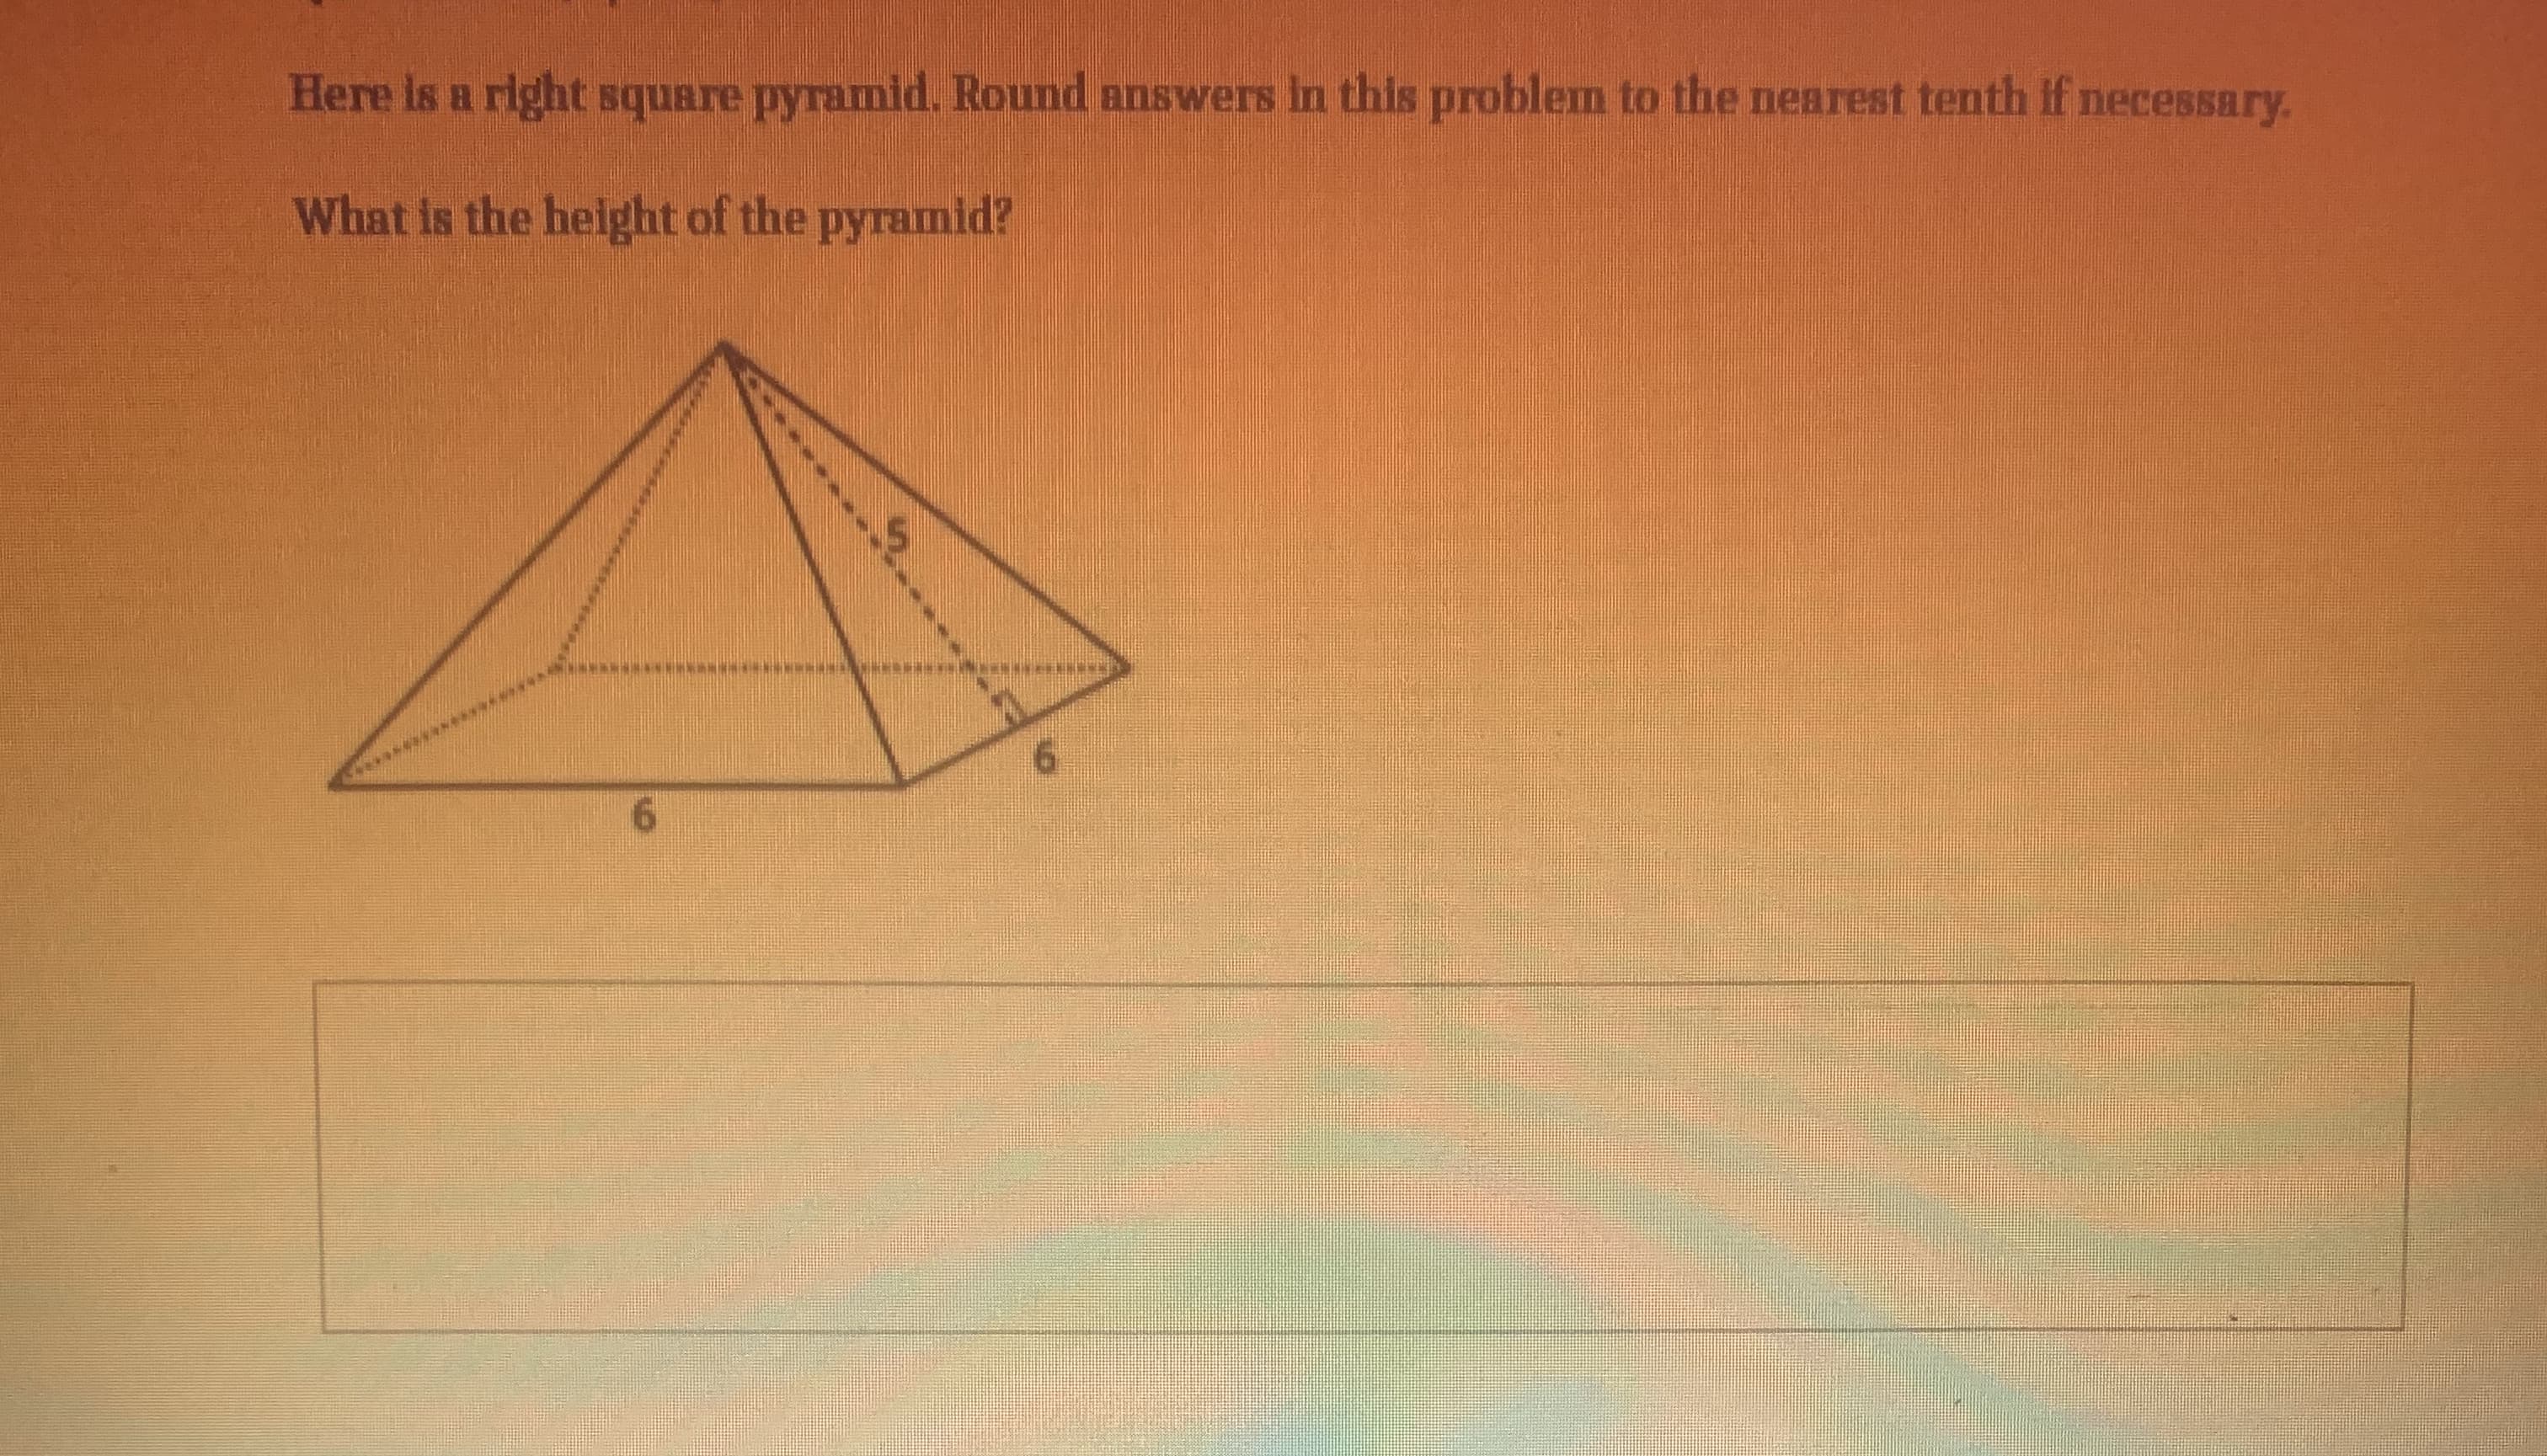 Here is a right square pyramid. Round answers in this problem to the nearest tenth if necessary.
What is the height of the pyramid?
9.
